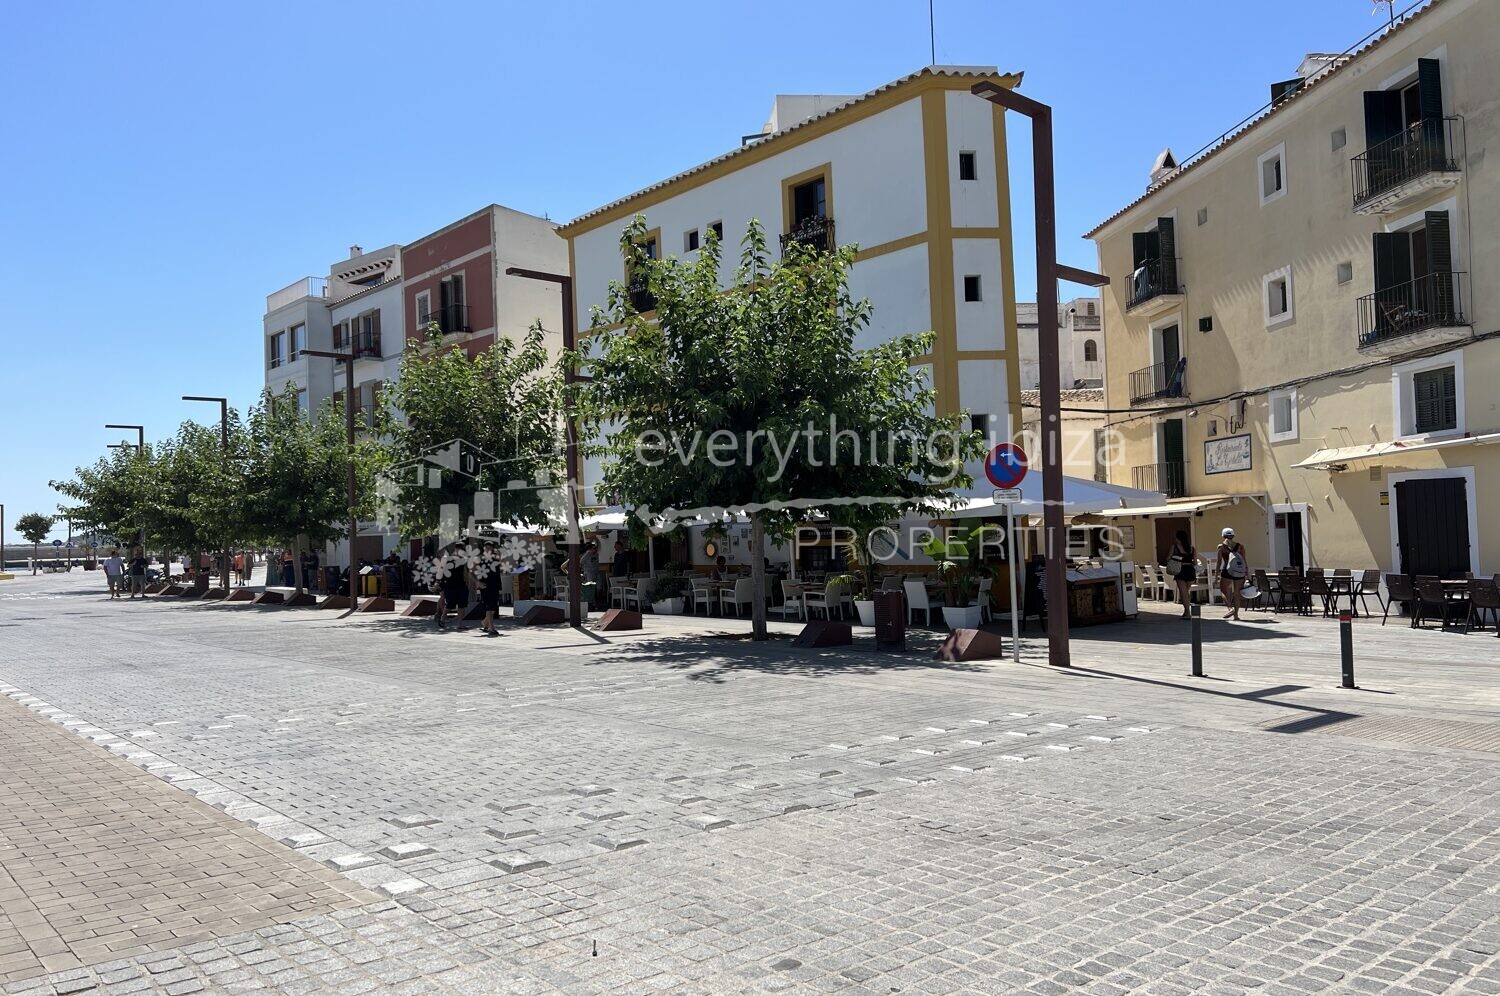 Charming 3 Storey Traditional Townhouse in La Marina, Ibiza Town, ref. 1476, for sale in Ibiza by everything ibiza Properties